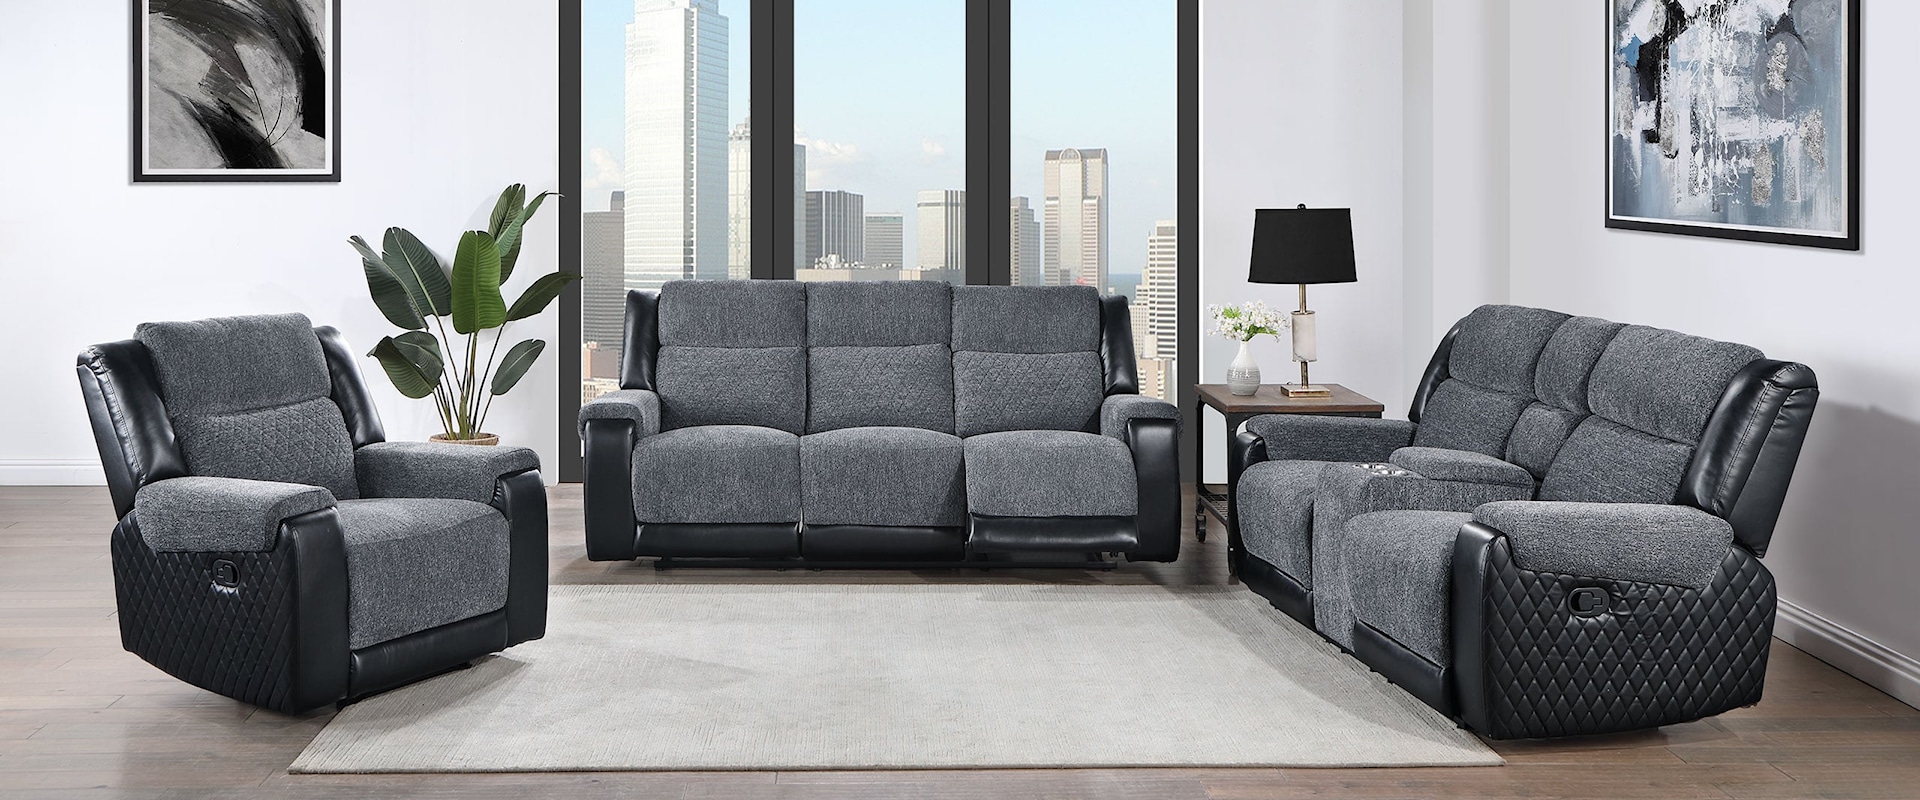 Transitional Reclining Sofa, Loveseat with Console and Recliner Set